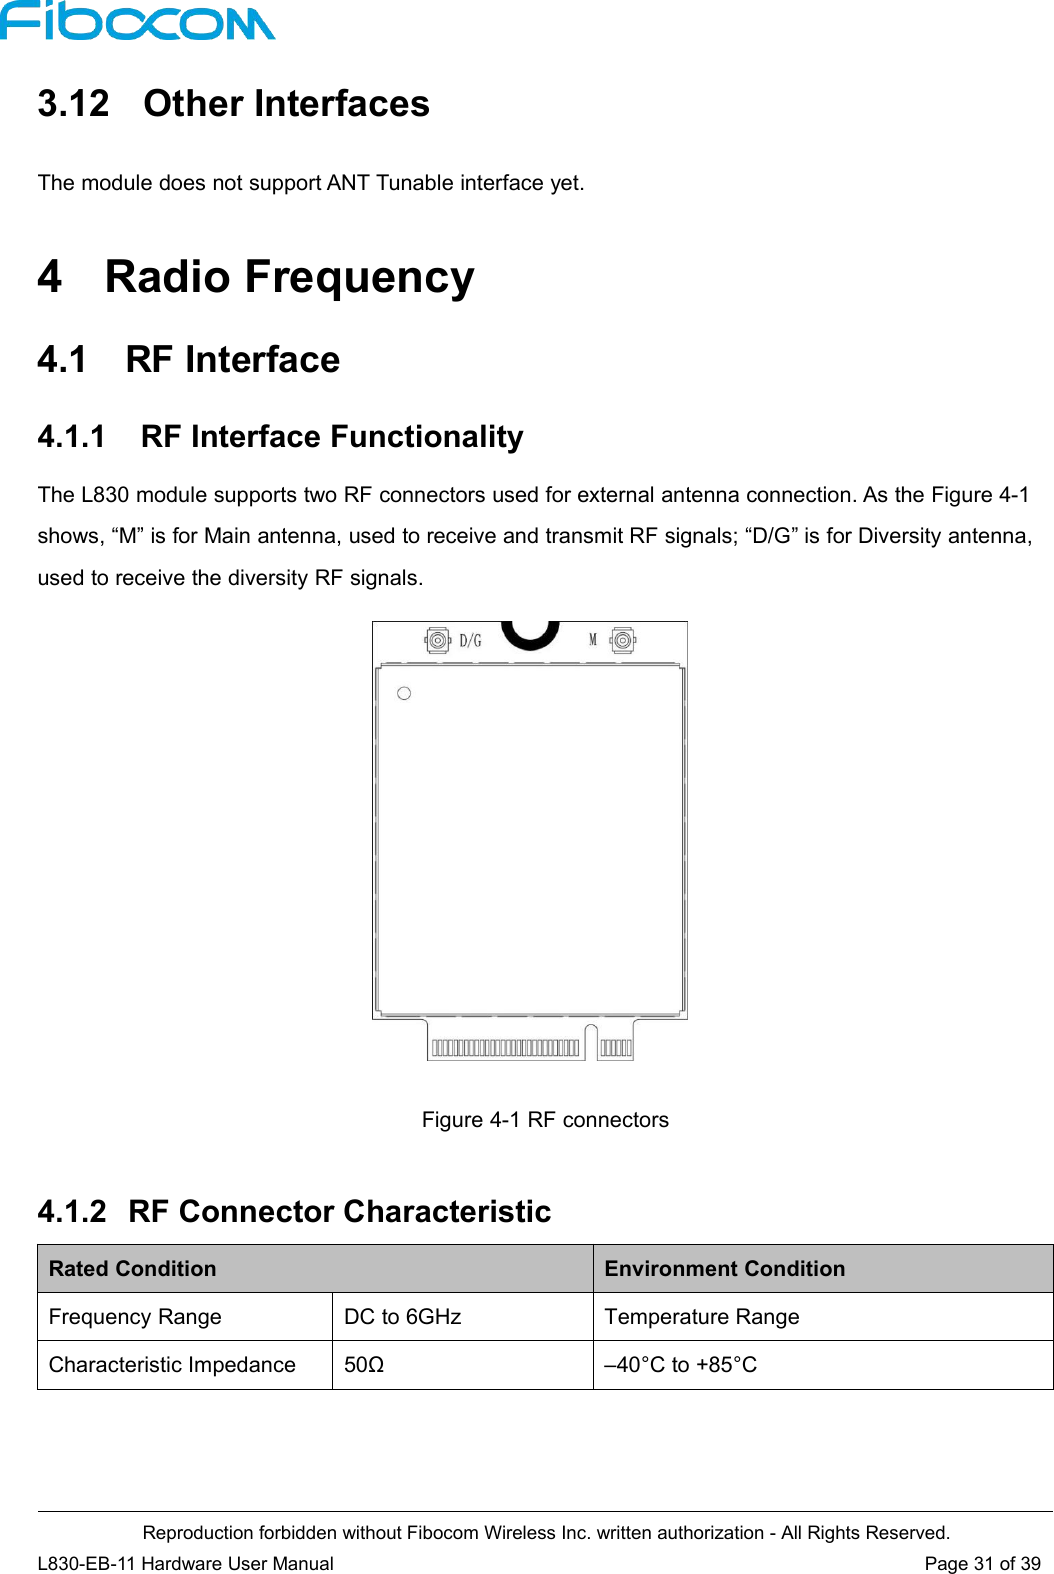 Reproduction forbidden without Fibocom Wireless Inc. written authorization - All Rights Reserved.L830-EB-11 Hardware User Manual Page 31 of 393.12 Other InterfacesThe module does not support ANT Tunable interface yet.4 Radio Frequency4.1 RF Interface4.1.1 RF Interface FunctionalityThe L830 module supports two RF connectors used for external antenna connection. As the Figure 4-1shows, “M” is for Main antenna, used to receive and transmit RF signals; “D/G” is for Diversity antenna,used to receive the diversity RF signals.Figure 4-1 RF connectors4.1.2 RF Connector CharacteristicRated ConditionEnvironment ConditionFrequency RangeDC to 6GHzTemperature RangeCharacteristic Impedance50Ω–40°C to +85°C